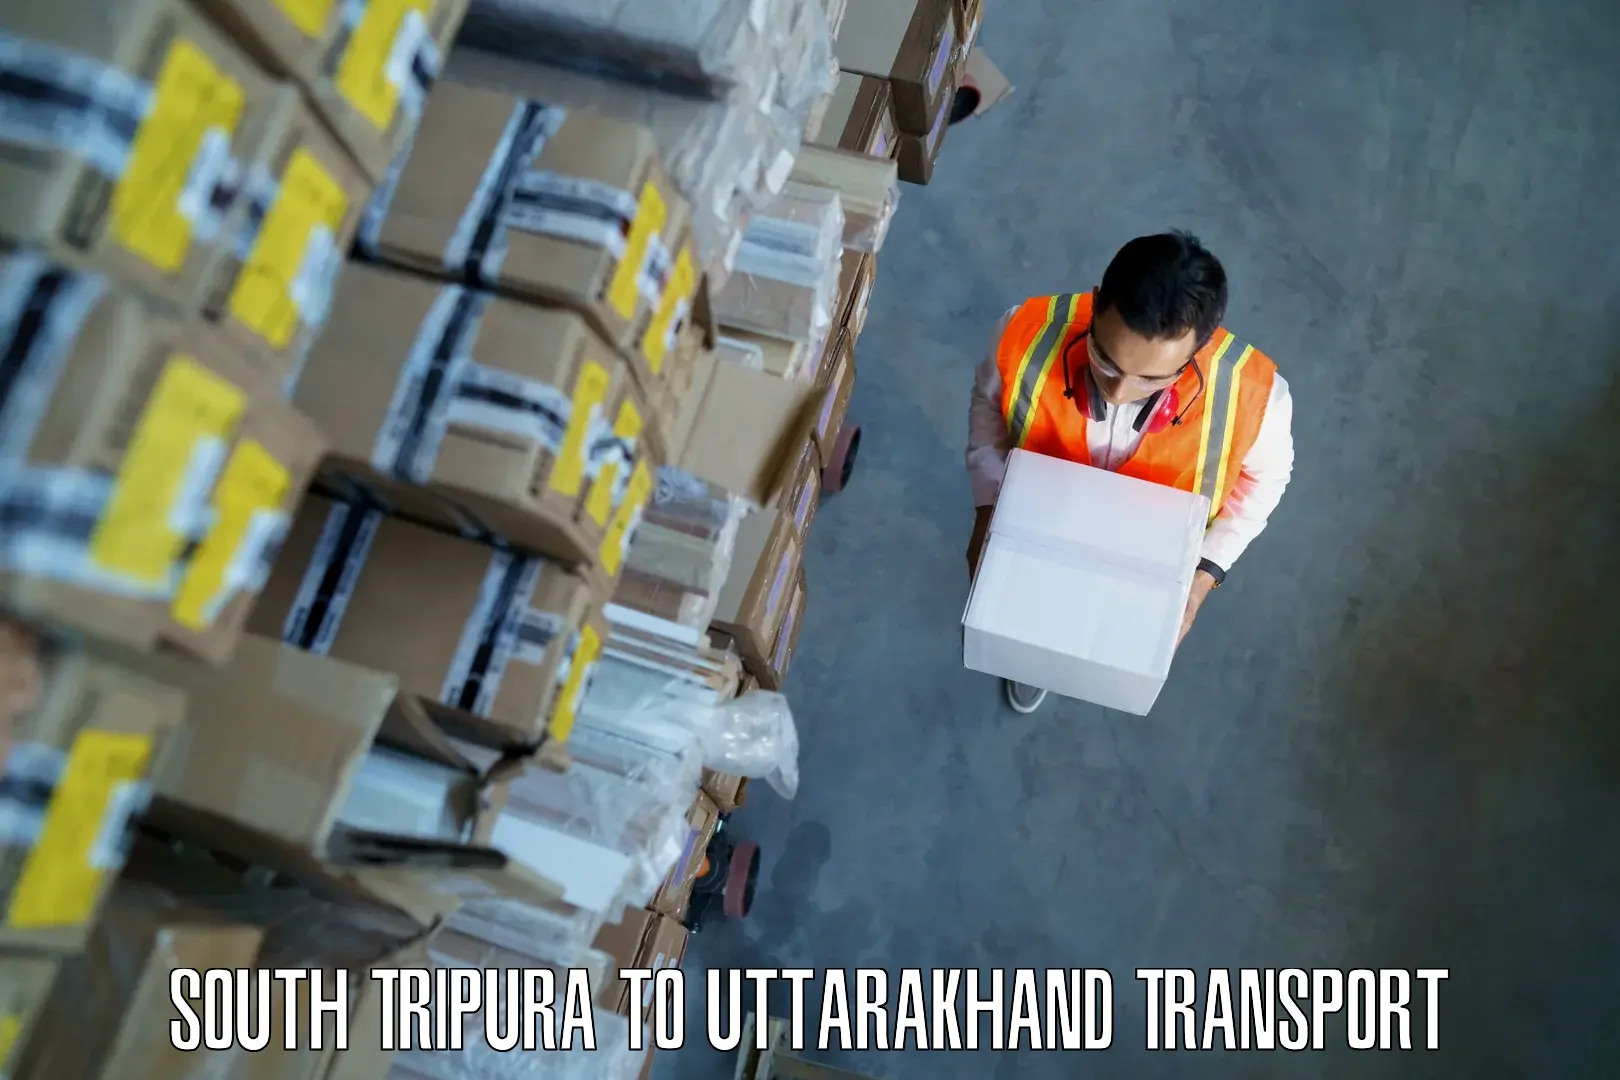 Domestic goods transportation services in South Tripura to Champawat